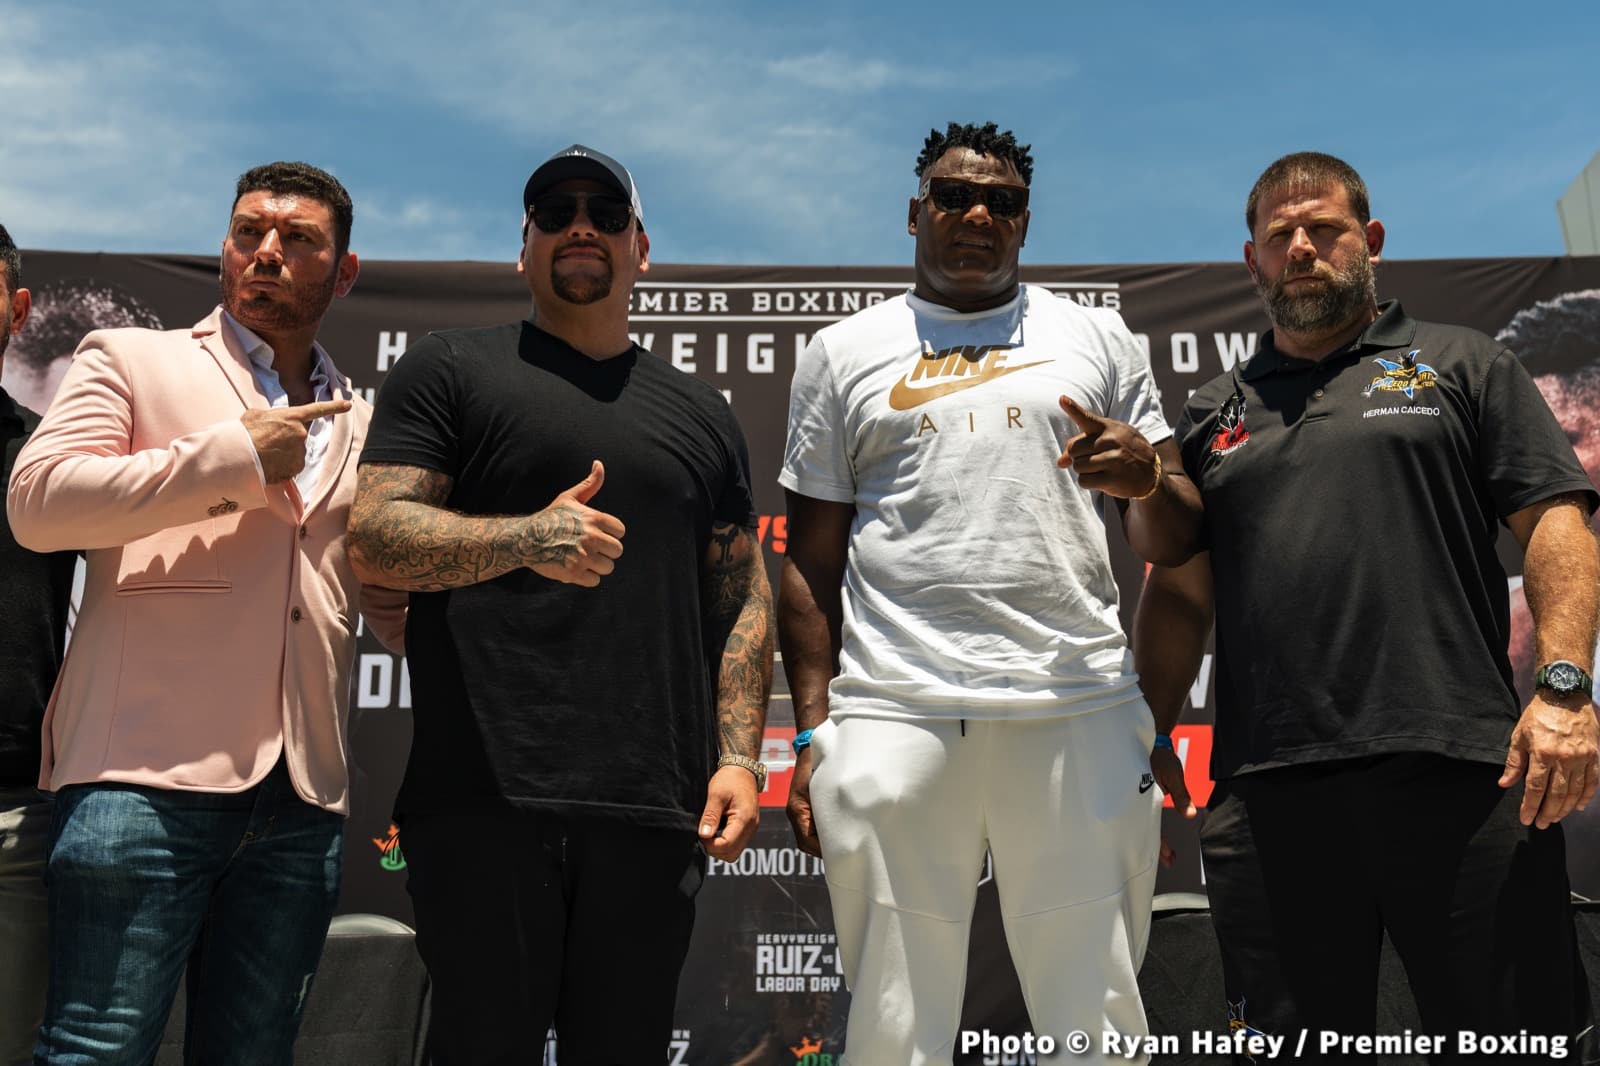 Andy Ruiz Says “There Has To Be A Trilogy” WIth Joshua, “Even If He Loses” Rematch With Usyk